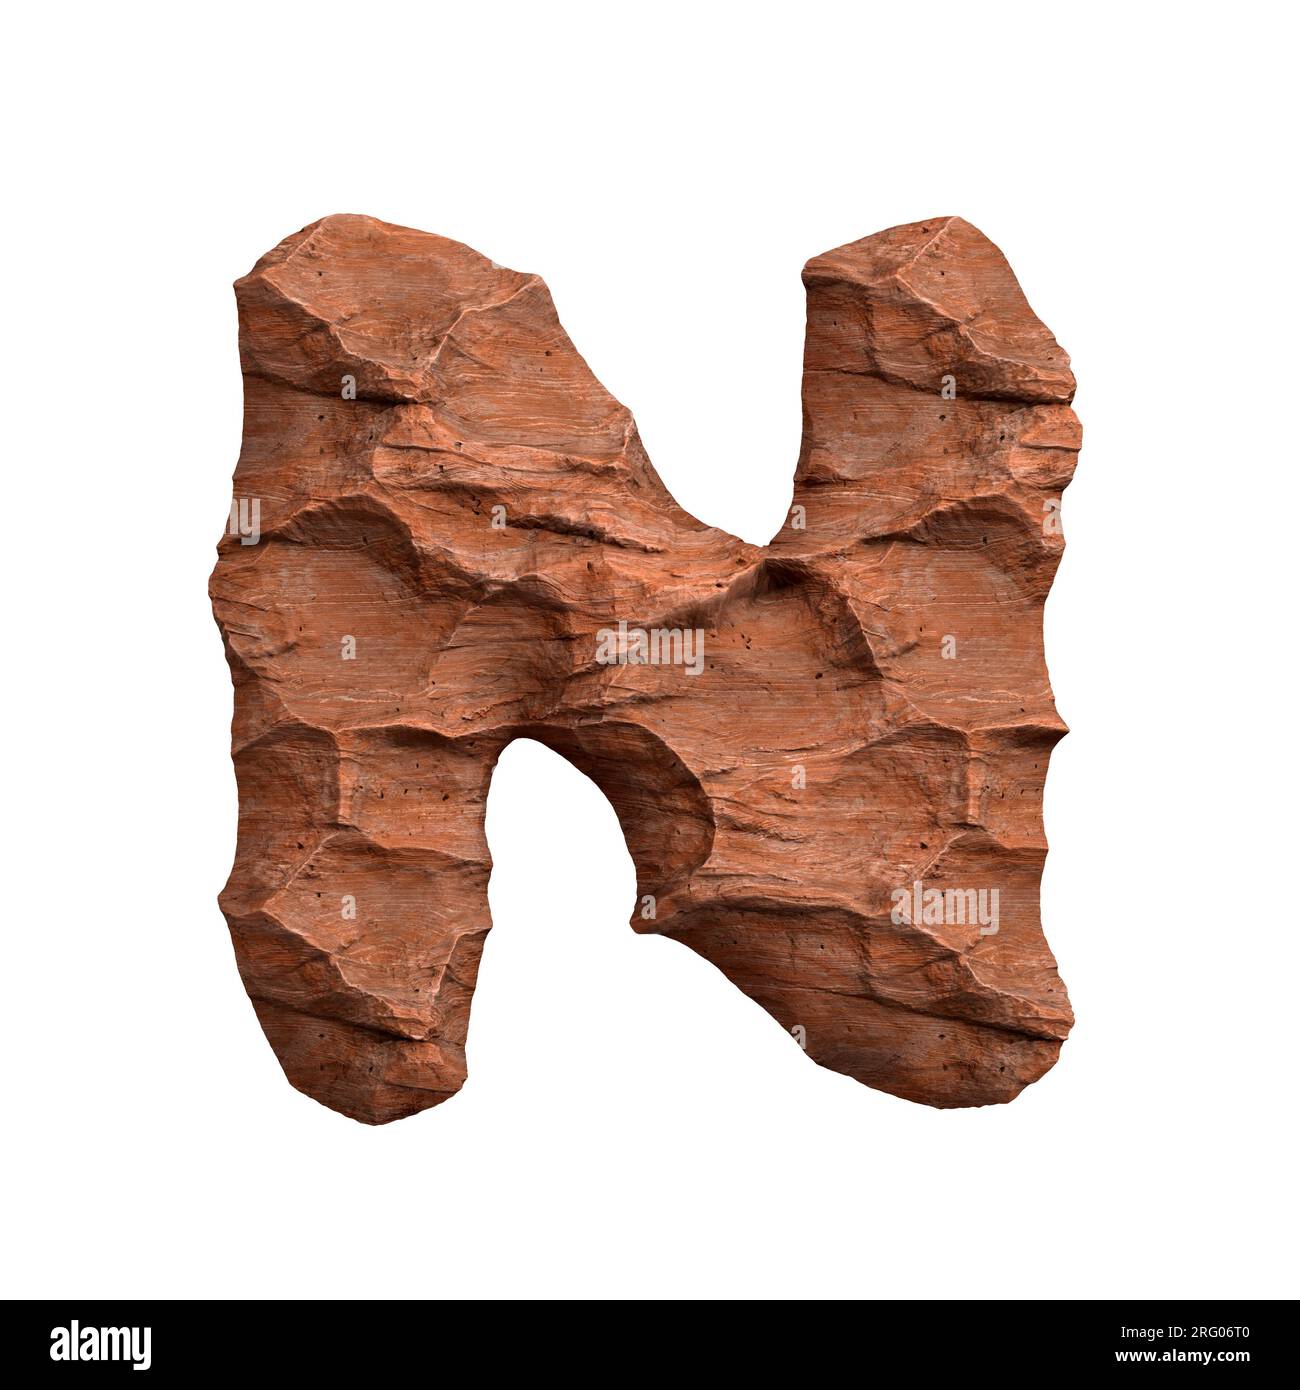 Desert sandstone letter N - Capital 3d red rock font - suitable for Arizona, geology or desert related subjects Stock Photo